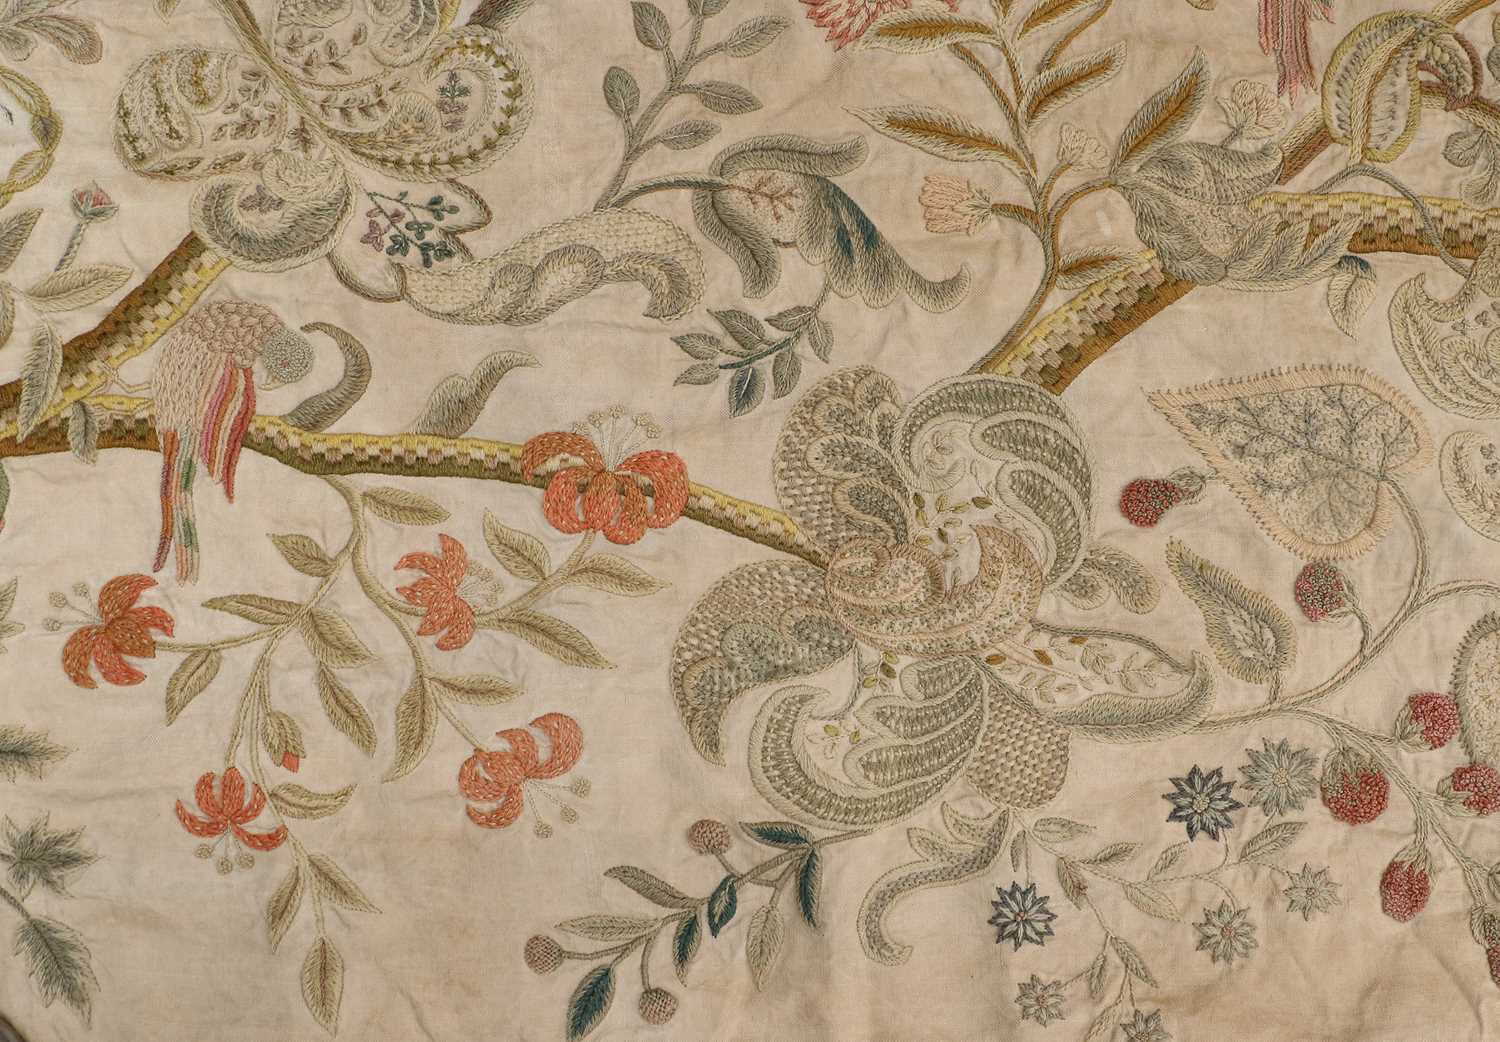 Late 19th Century Crewel Work Curtain, decorated overall in decorative floral designs with birds - Image 3 of 21